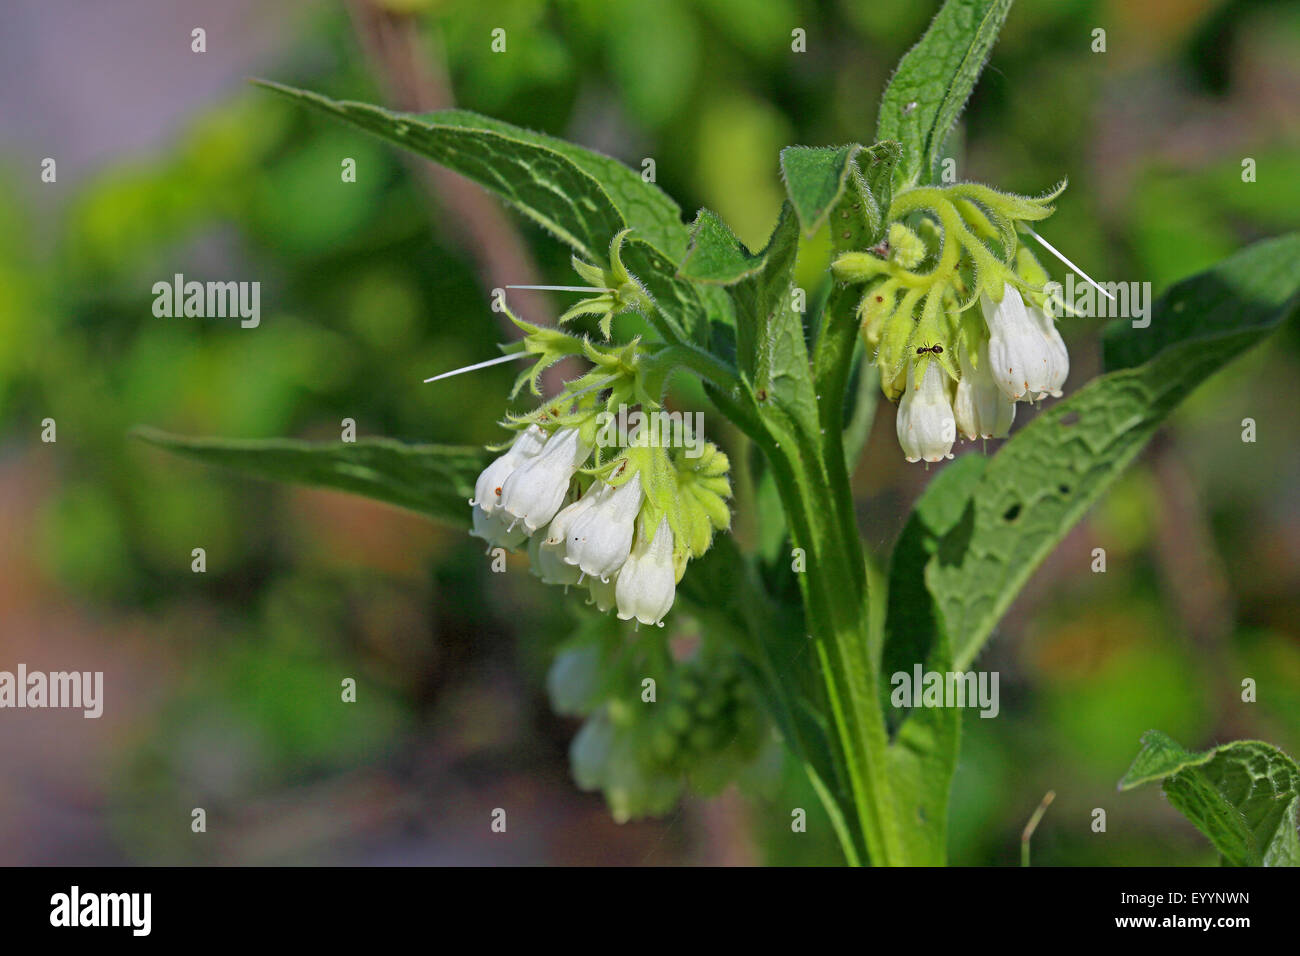 common comfrey (Symphytum officinale), inflorescence with white blossoms, Netherlands, Frisia Stock Photo